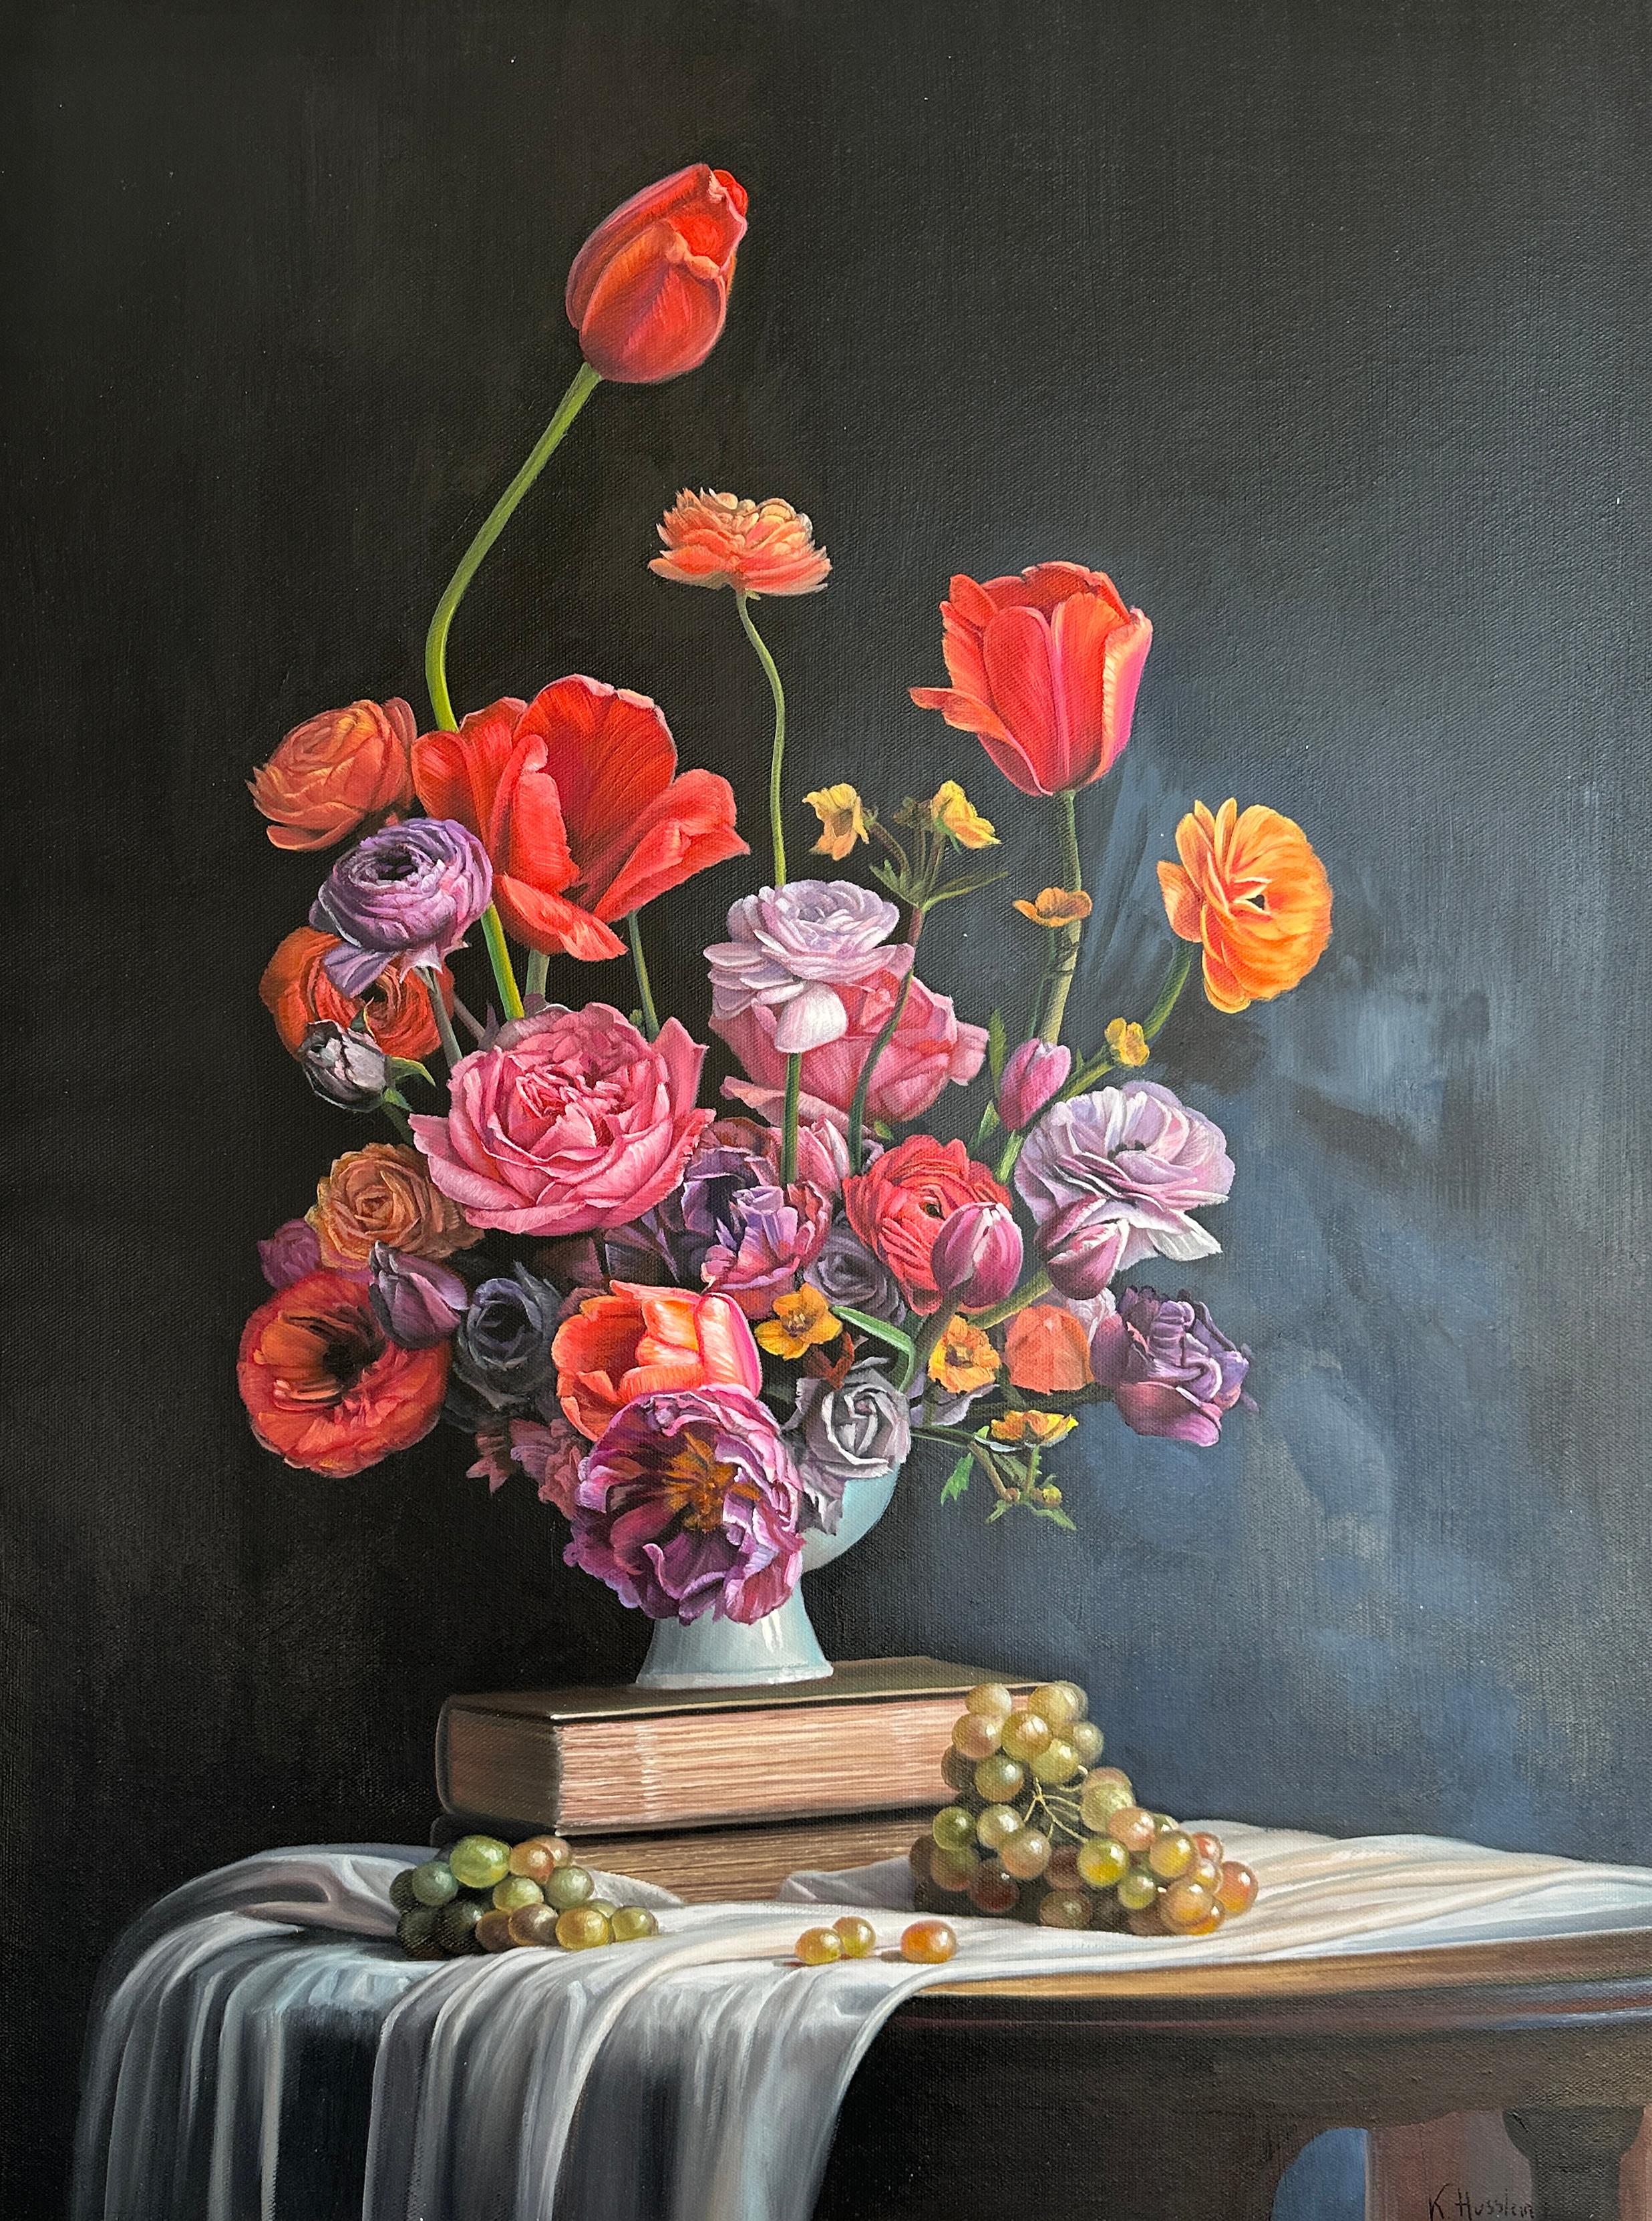 Katharina Husslein Landscape Painting - Softer Notes for Love by K Husslein Botanical Hyperrealistic Still life